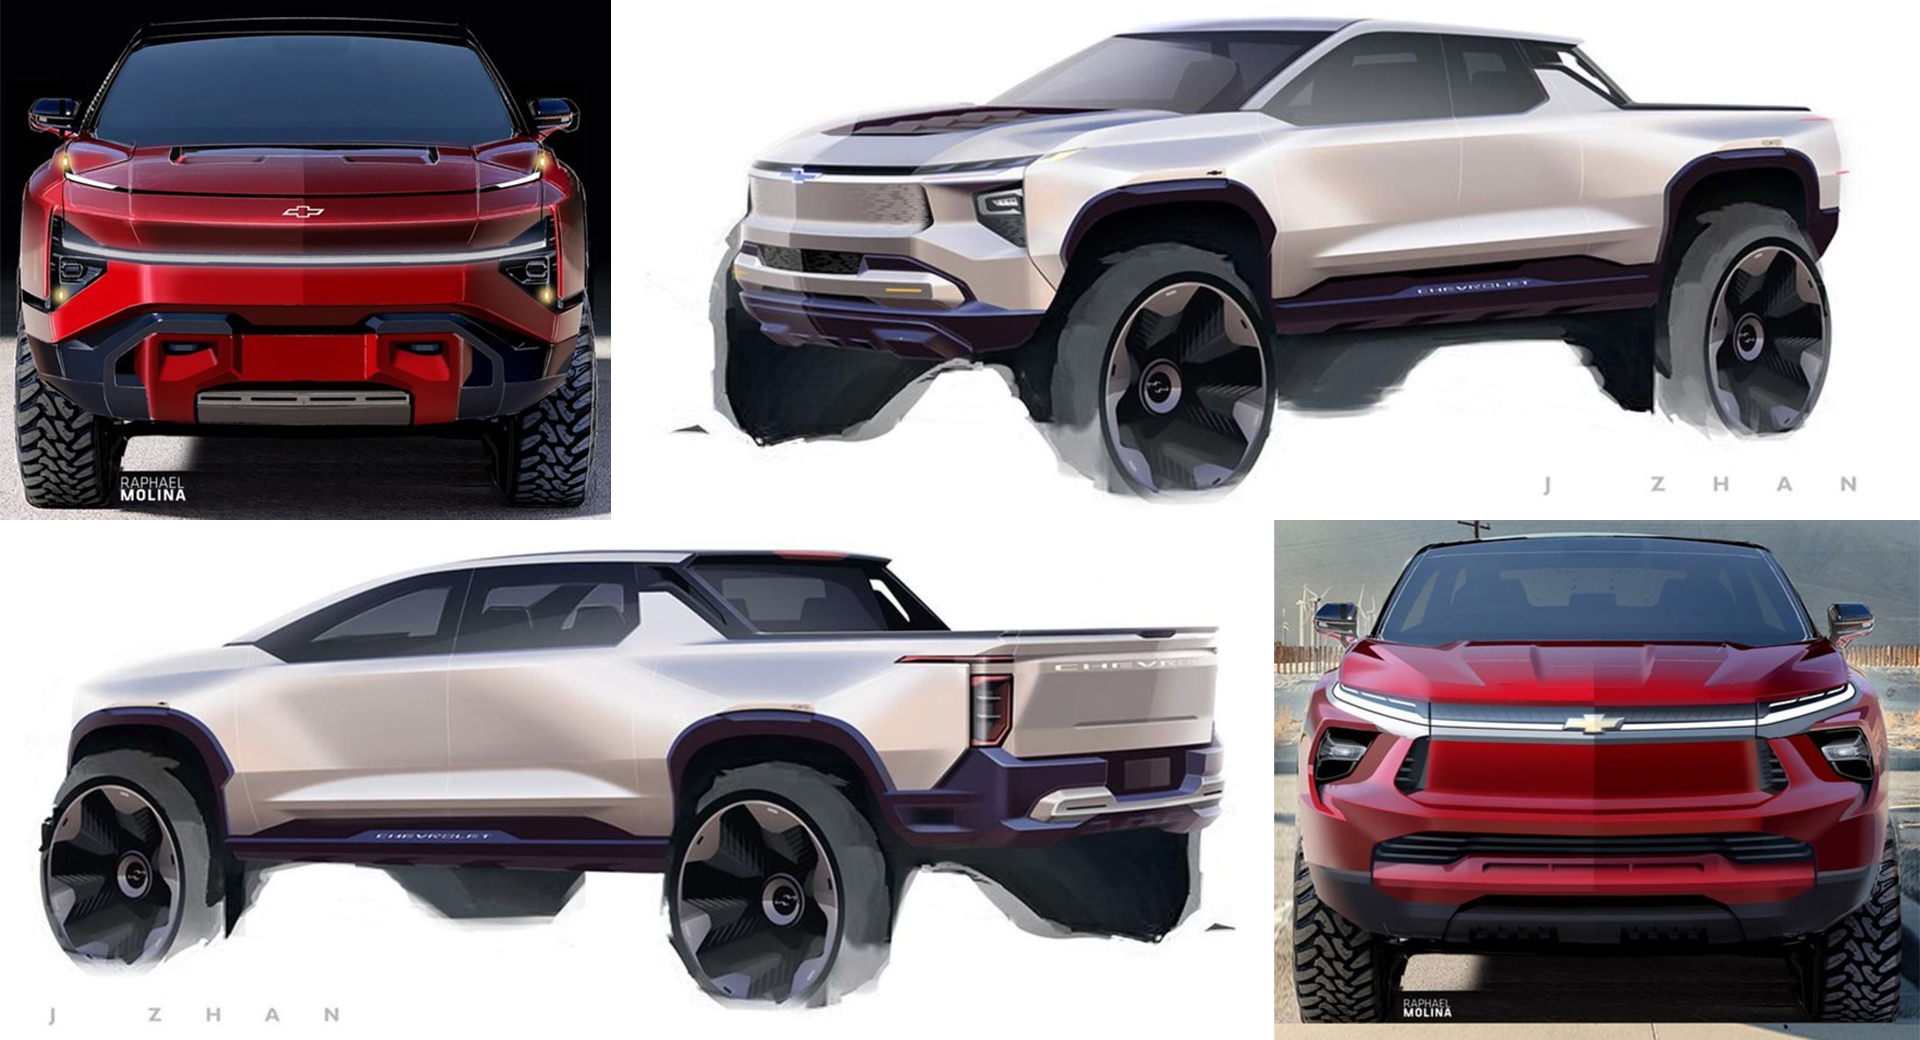 Should Chevy's Next-Gen Pickups Look Like This GM Design Sketch